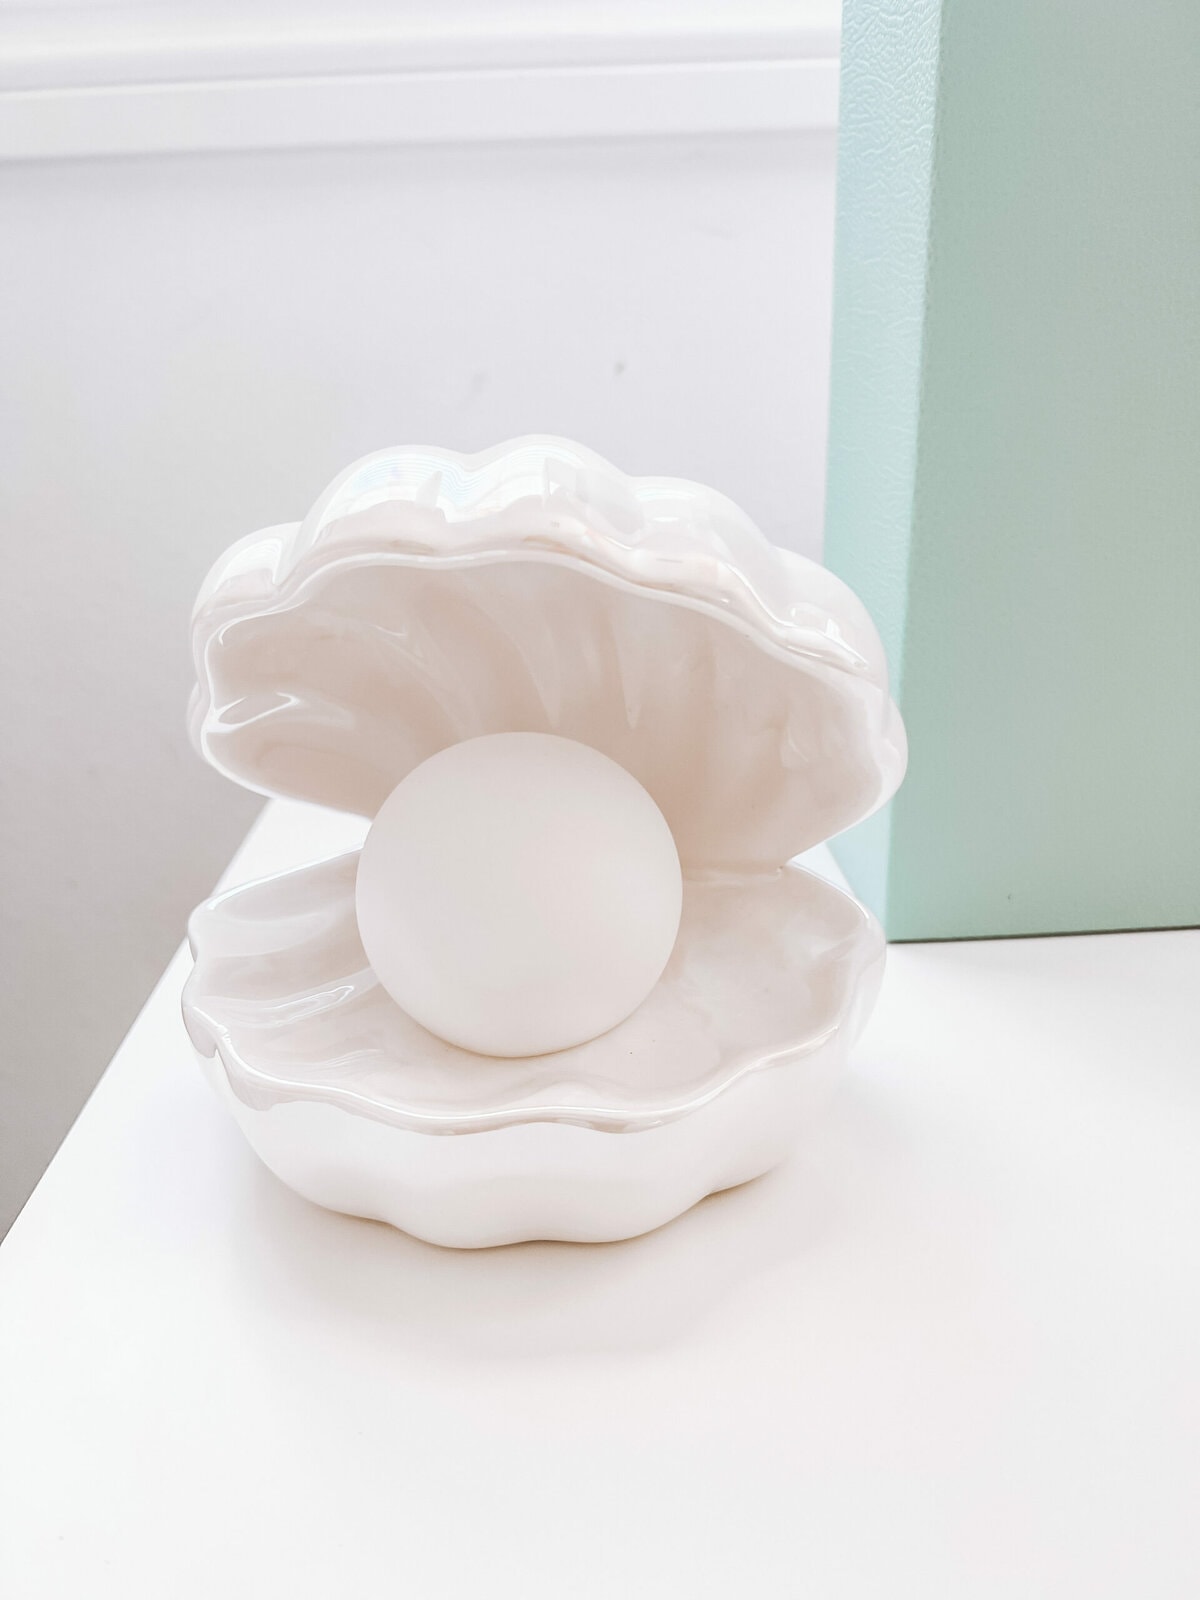 clam shell lamp for girls room